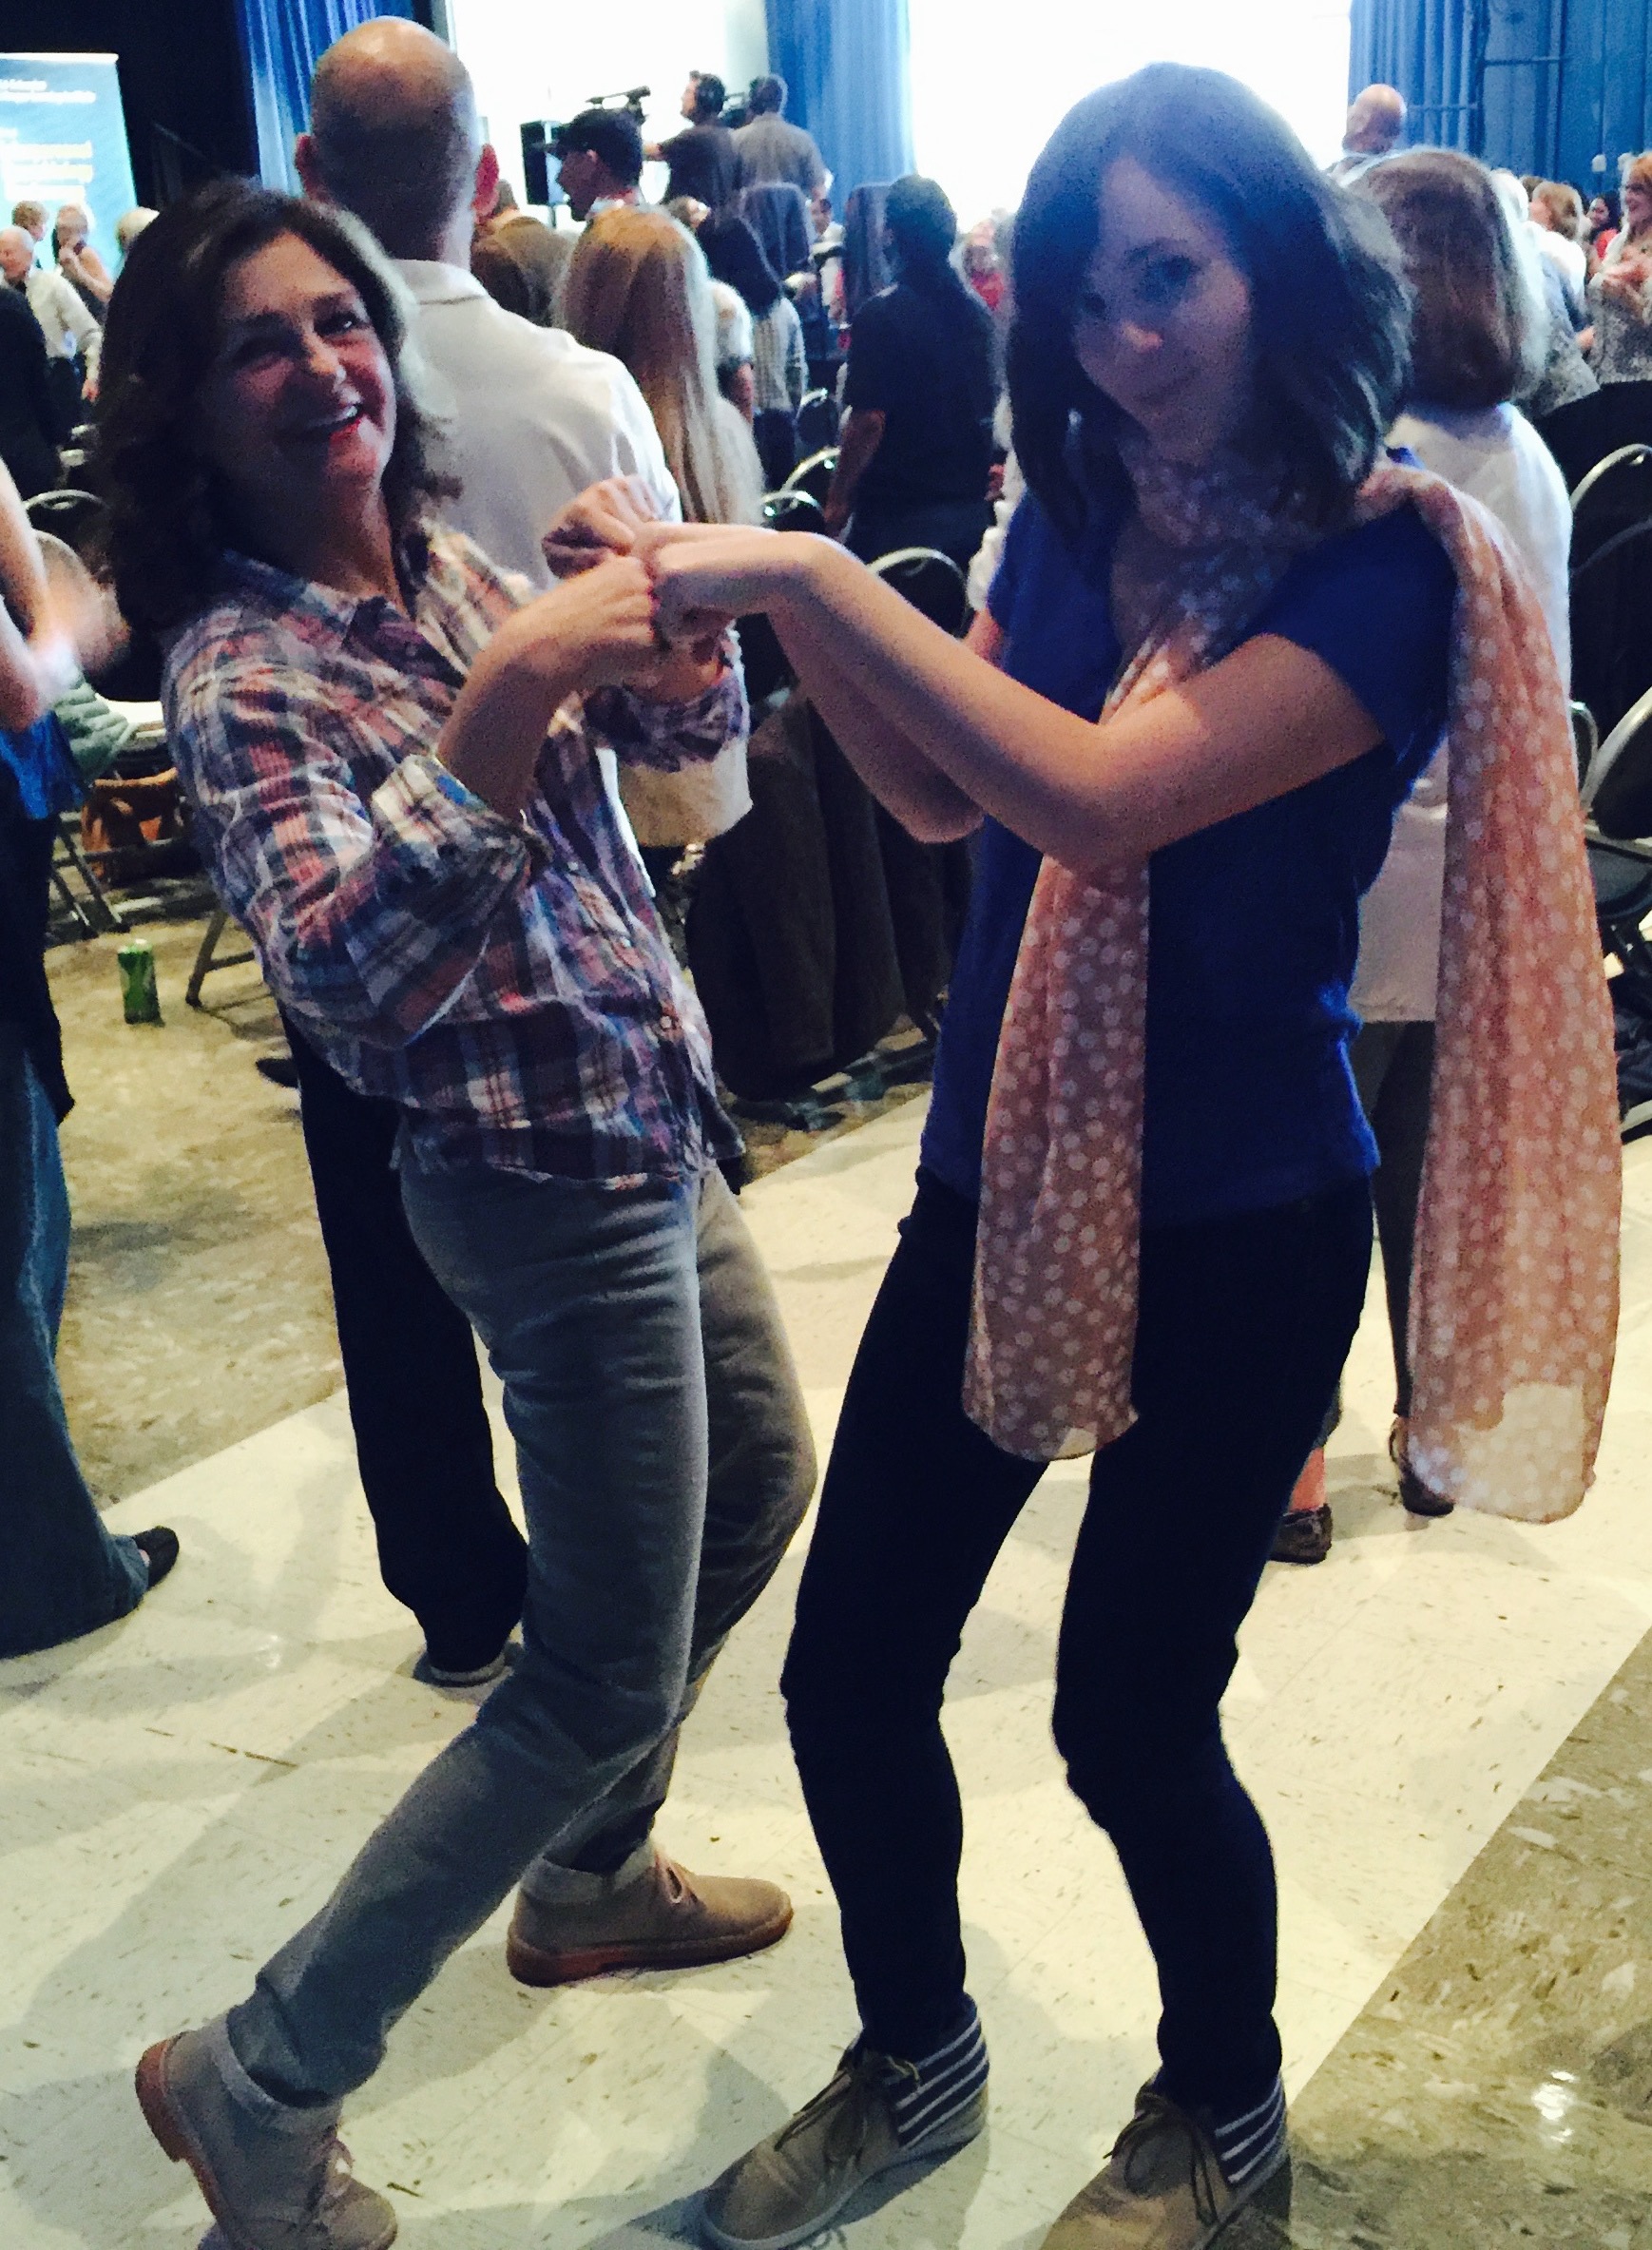  Dancing with Jill while Studying Neuroscience of Play, Creativity and Mindfulness with Daniel Siegel in LA, CA in March 